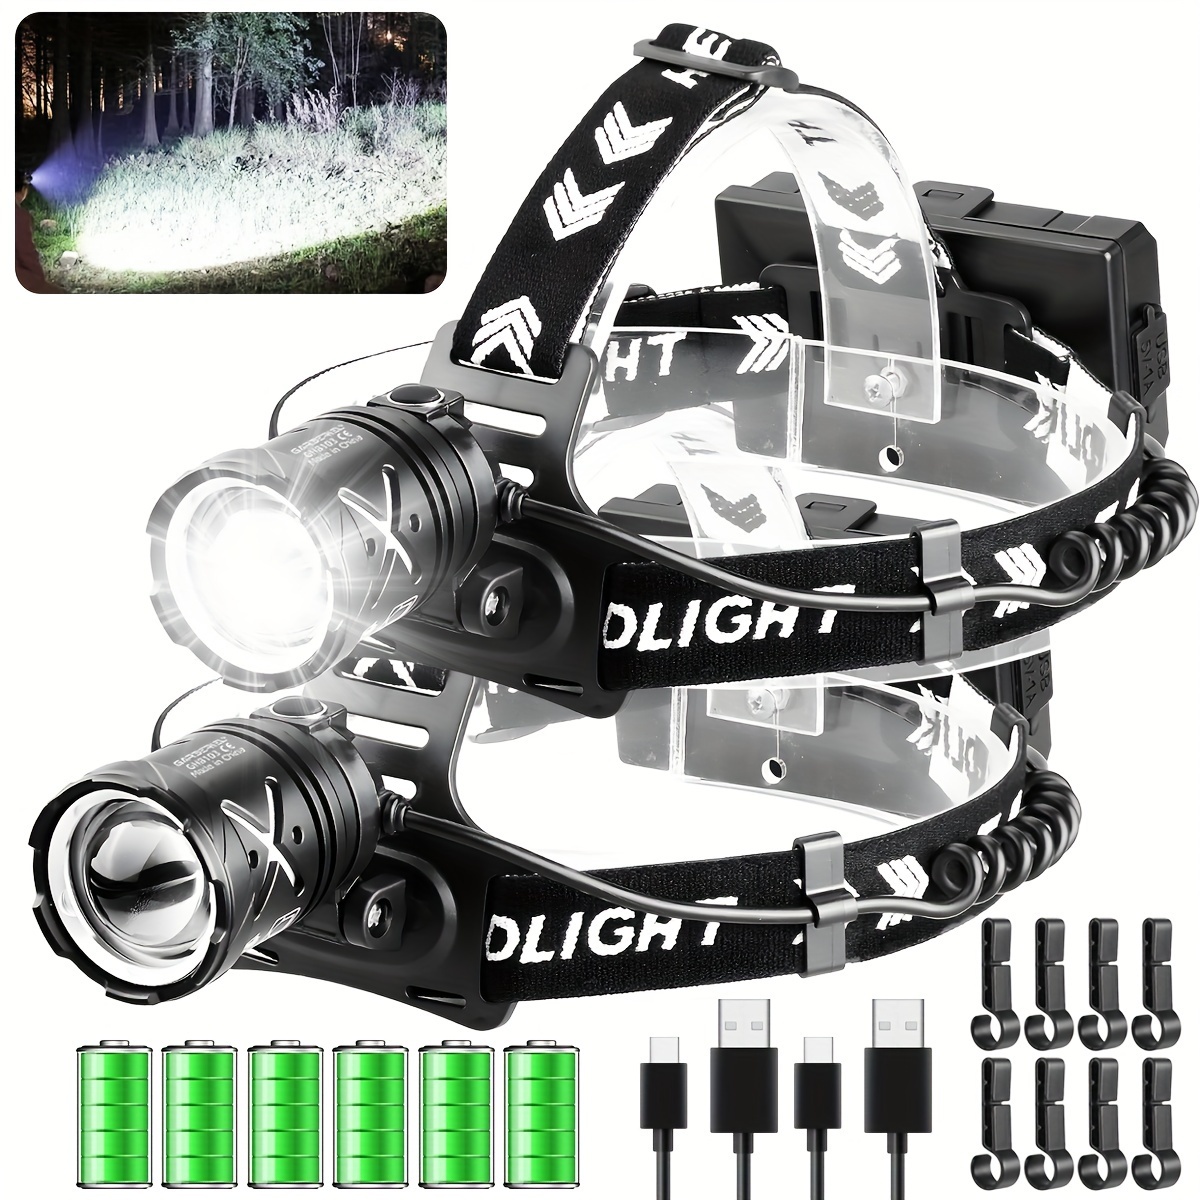 

One/two Sets Super Bright Powerful Headlamp, Usb Rechargeable Headlight, With 18650 Battery For Outdoor Camping Running Fishing